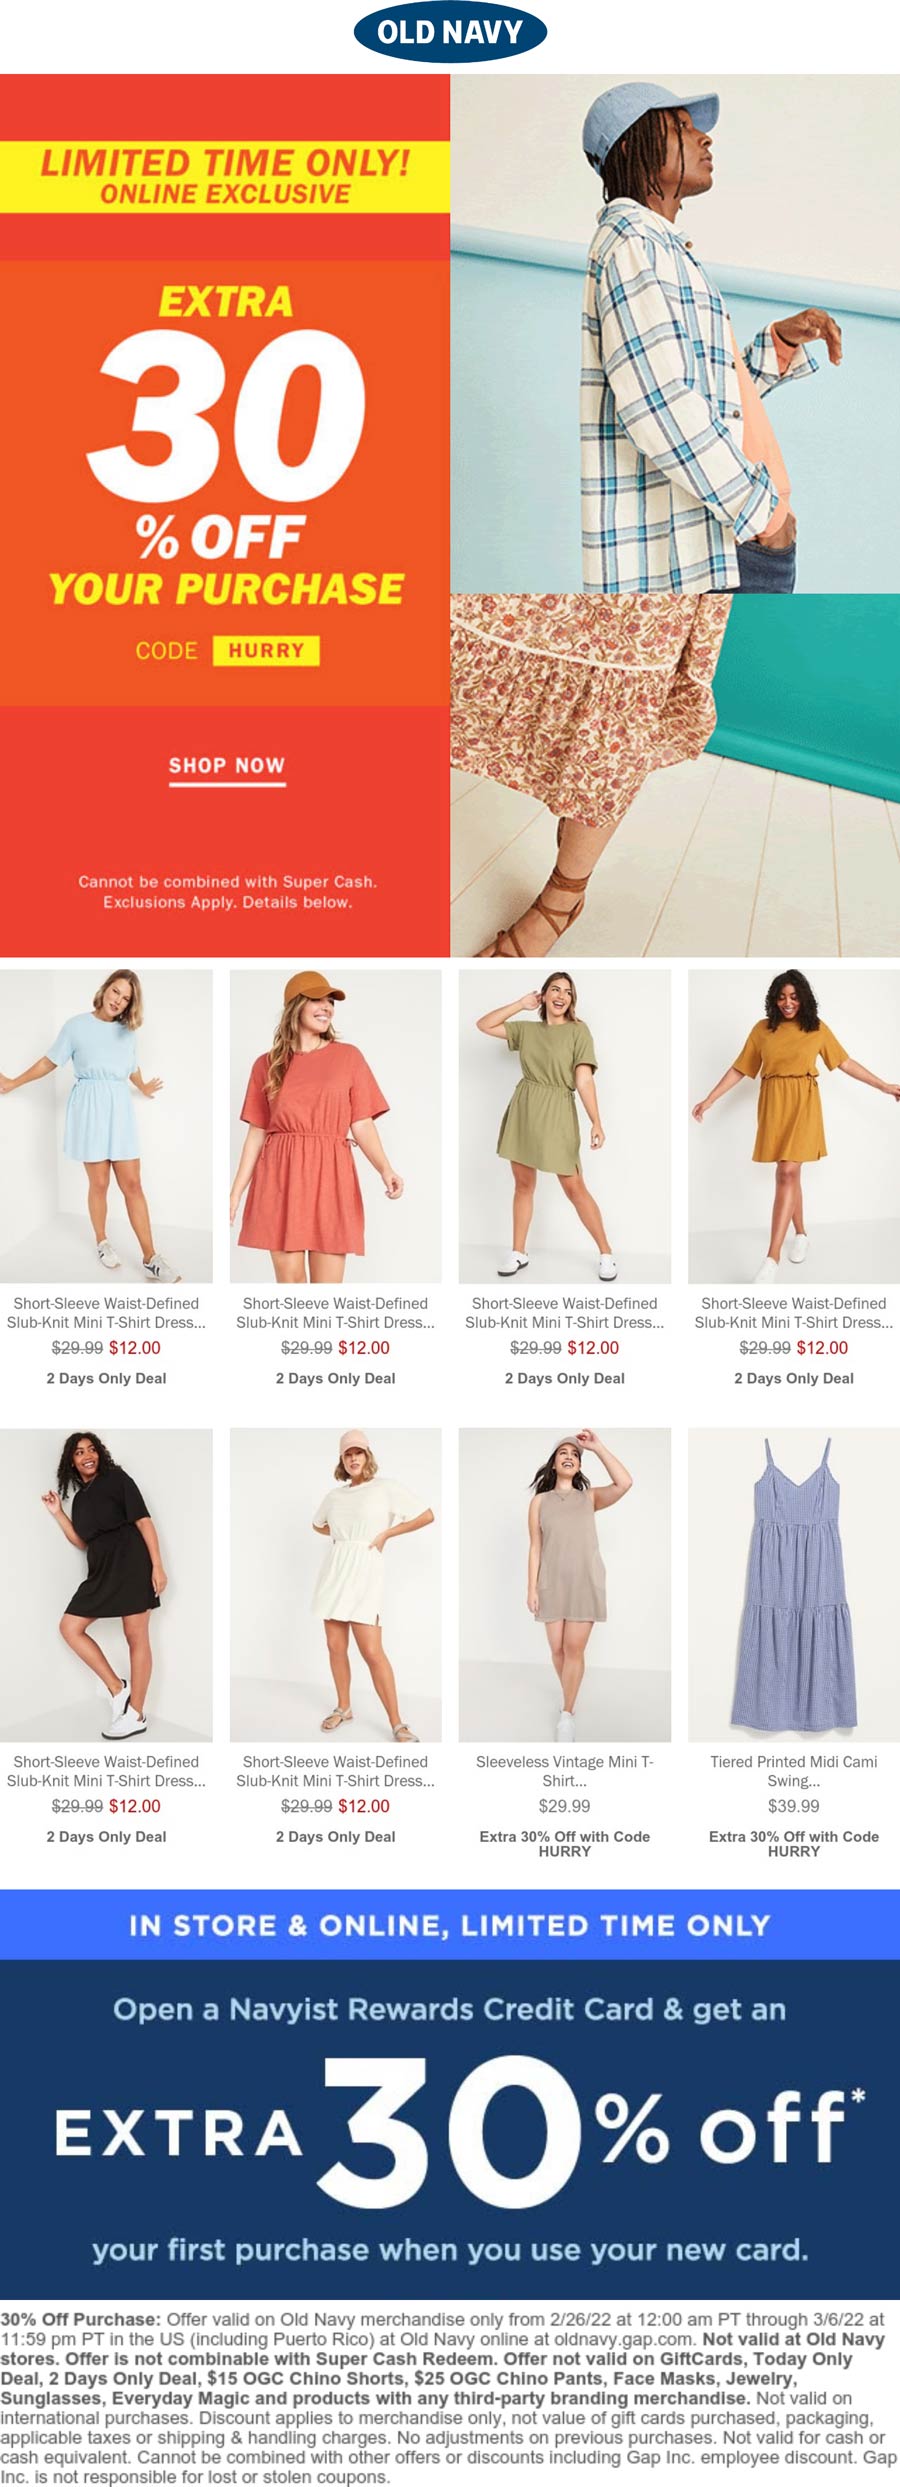 Old Navy stores Coupon  Extra 30% off online at Old Navy via promo code HURRY #oldnavy 